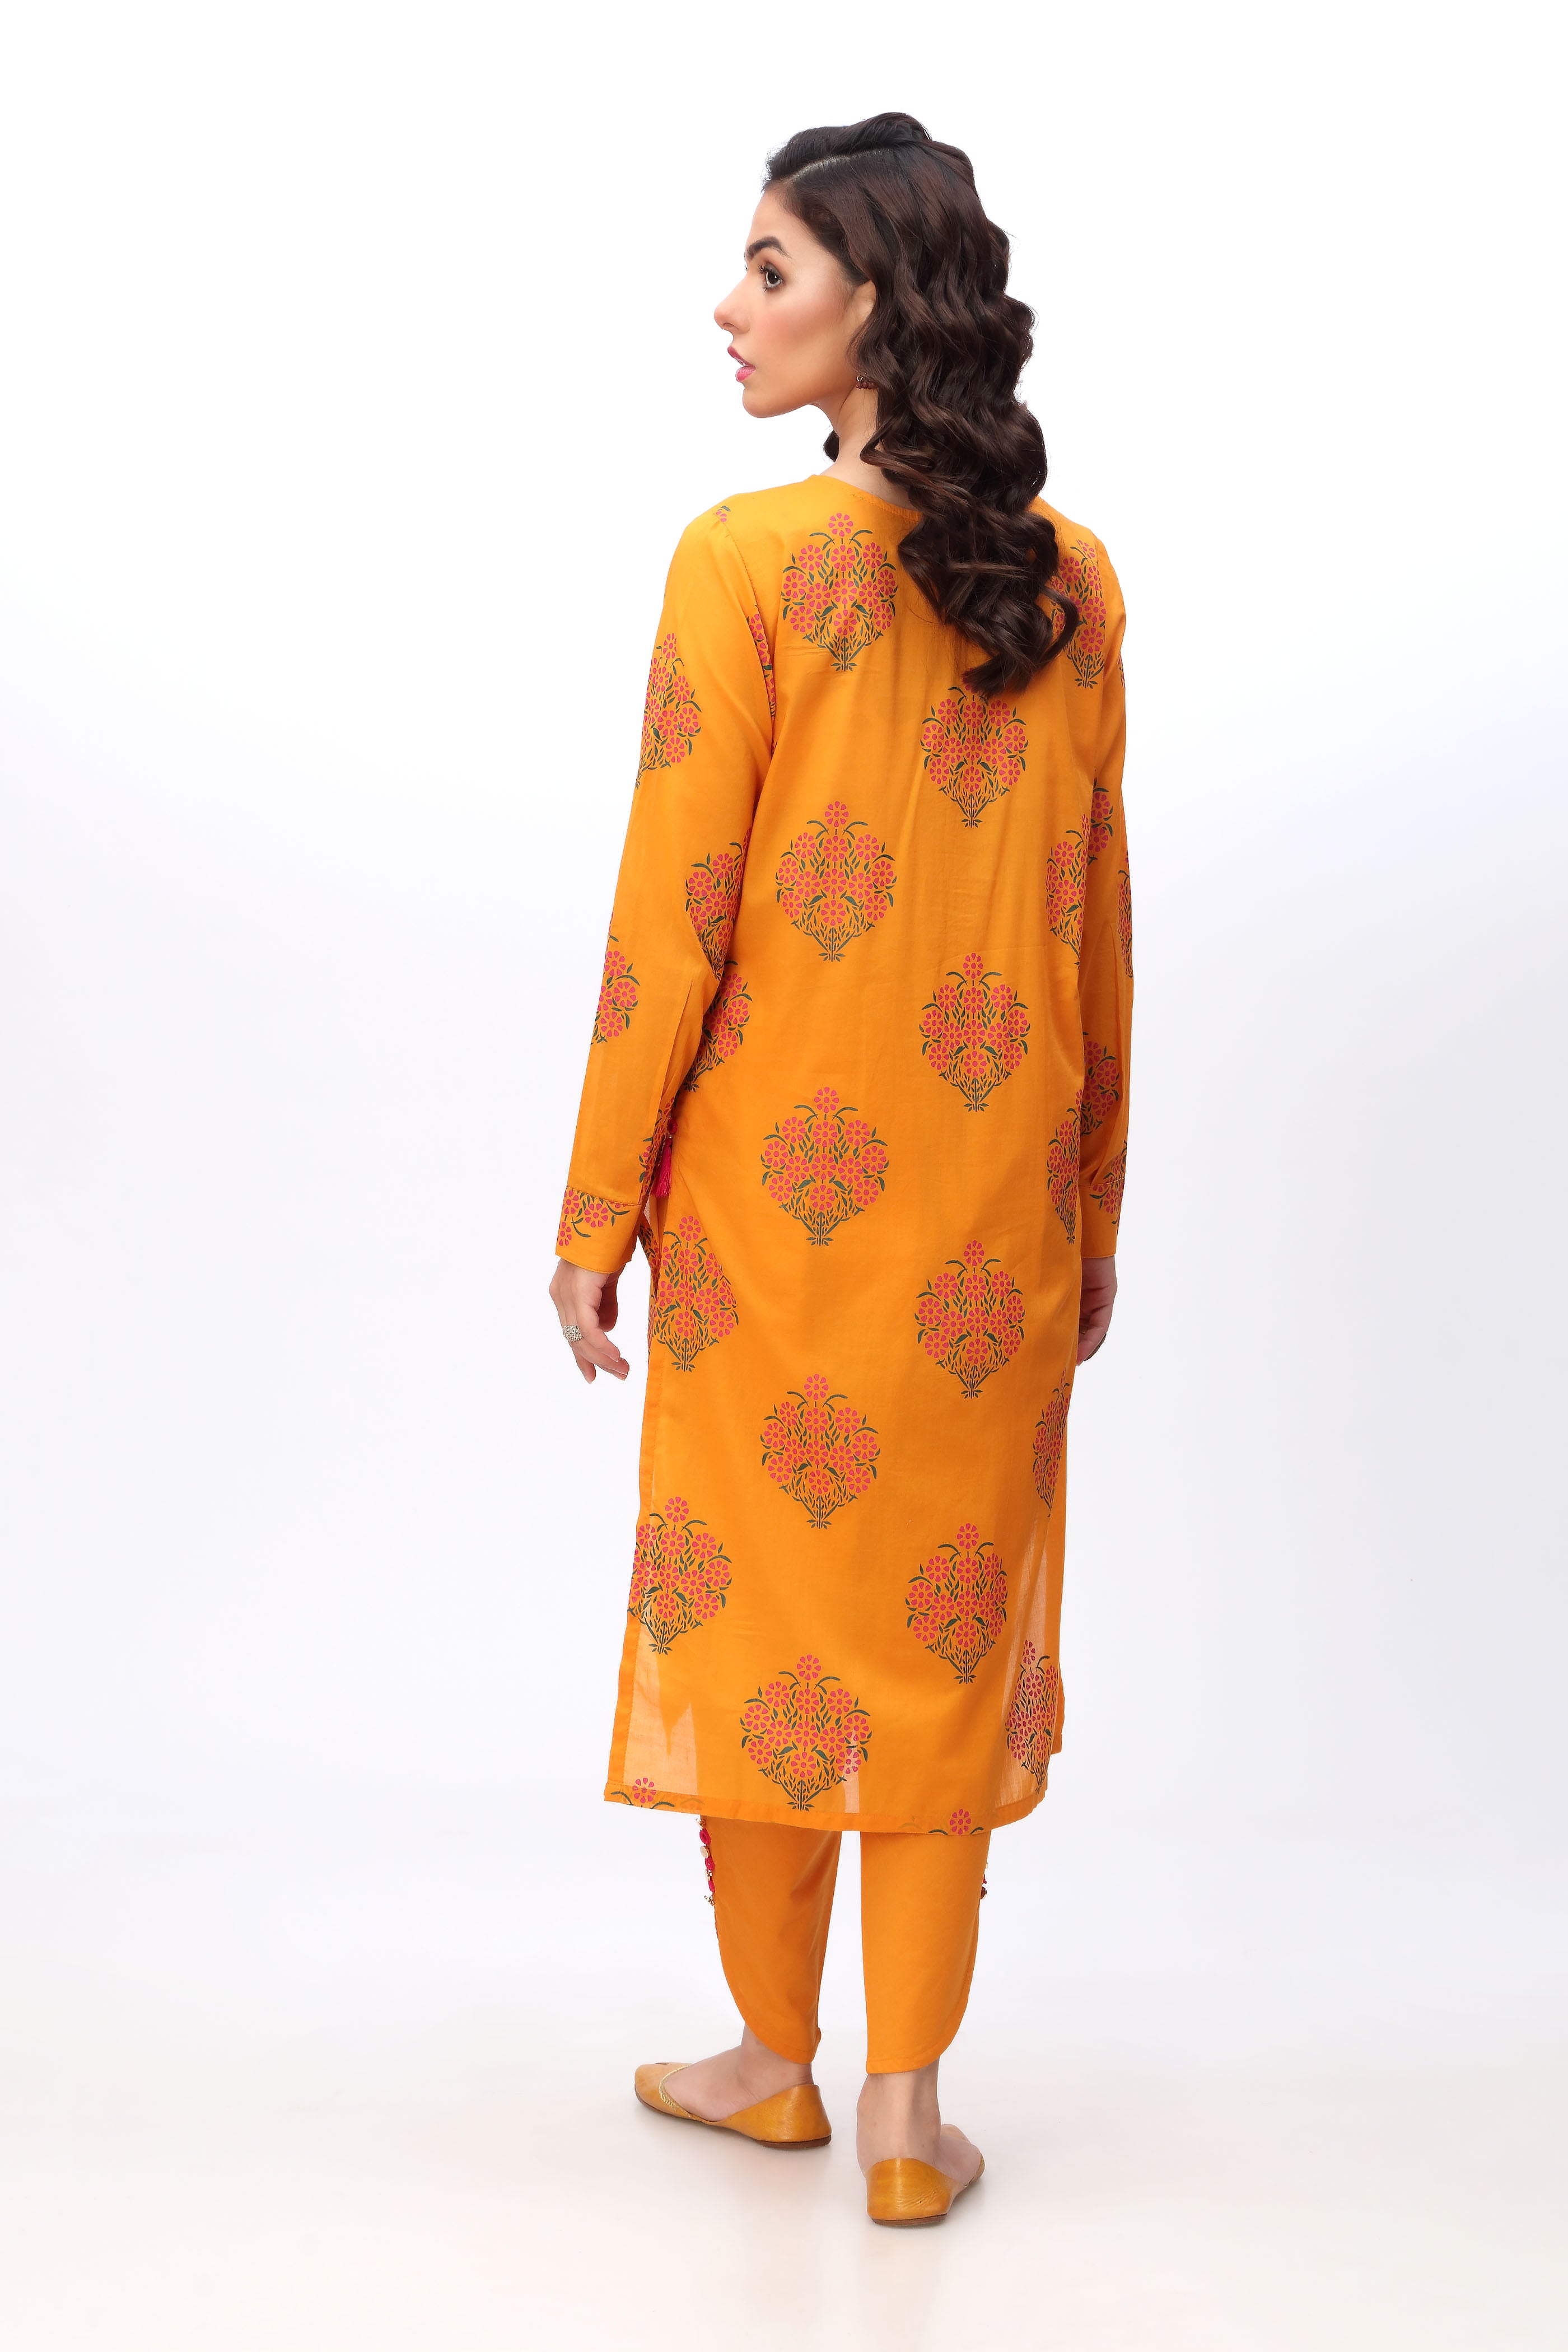 Pink Impression in Mustard coloured Printed Lawn fabric 3